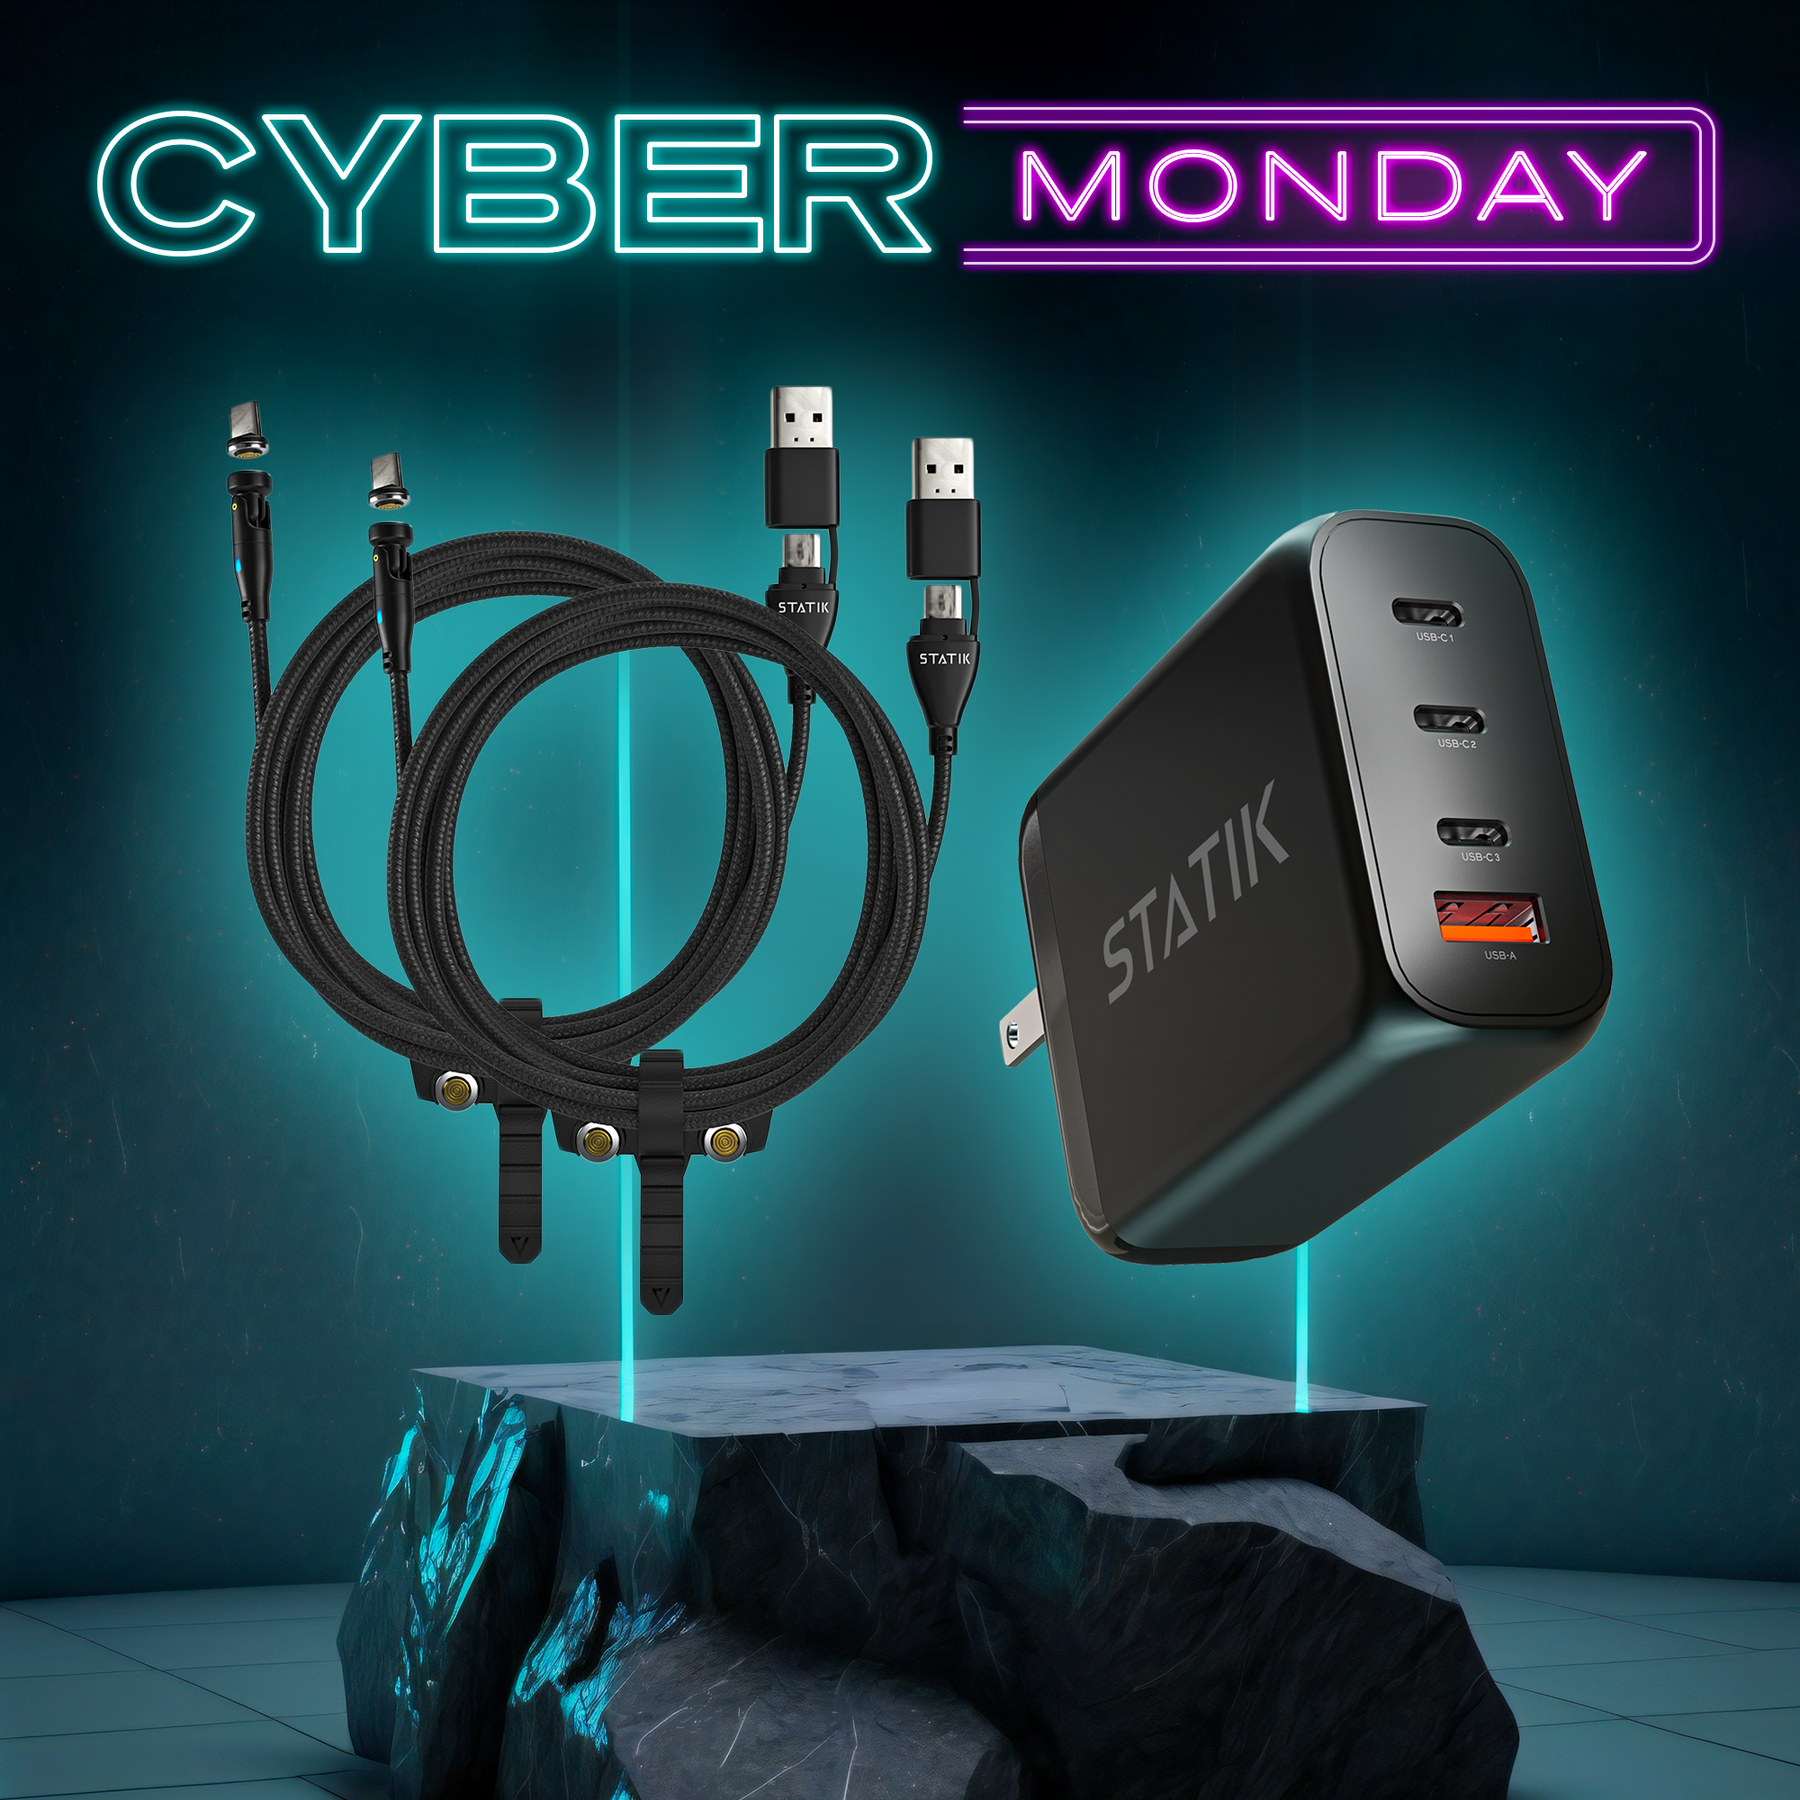 Your phone can see inside anything with Cyber Monday borescope deals